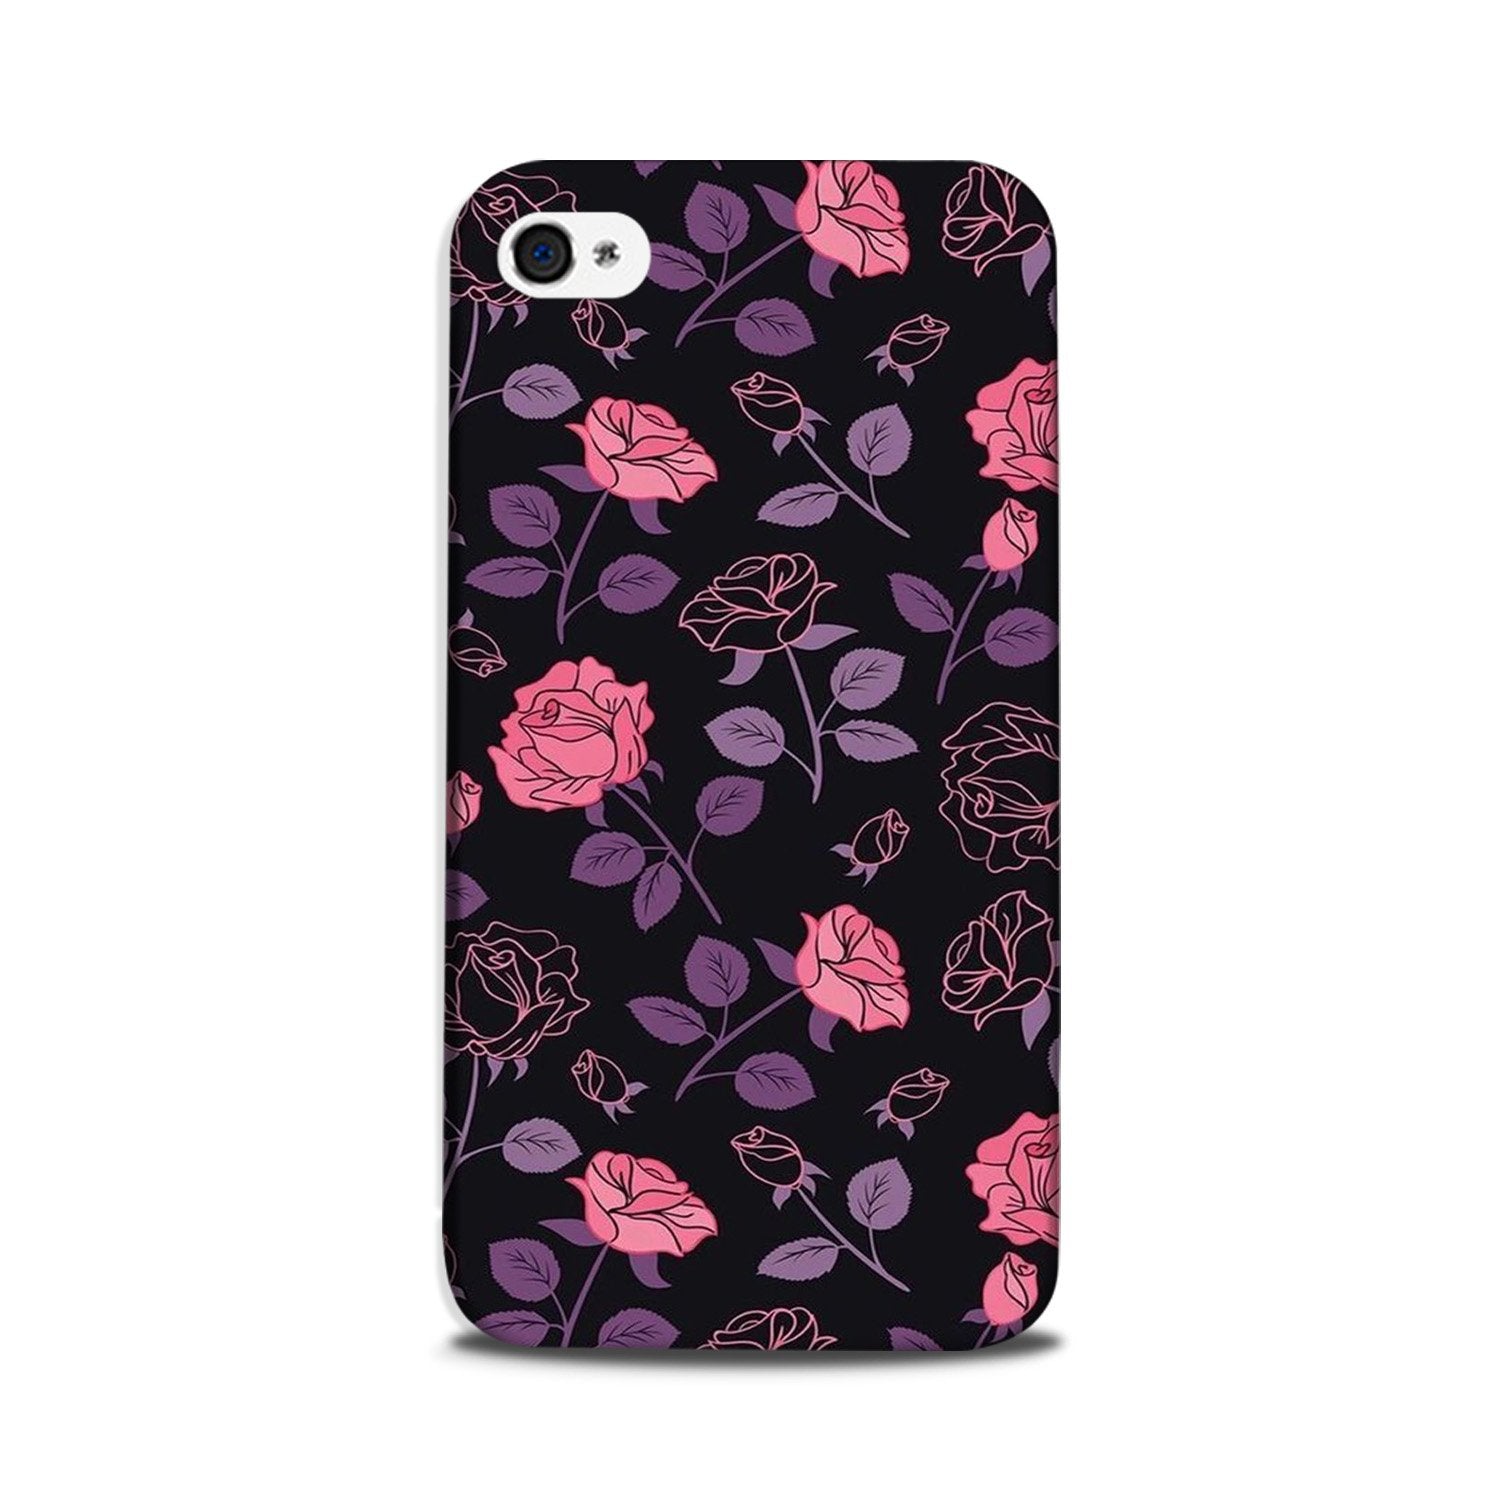 Rose Black Background Case for iPhone 5/ 5s